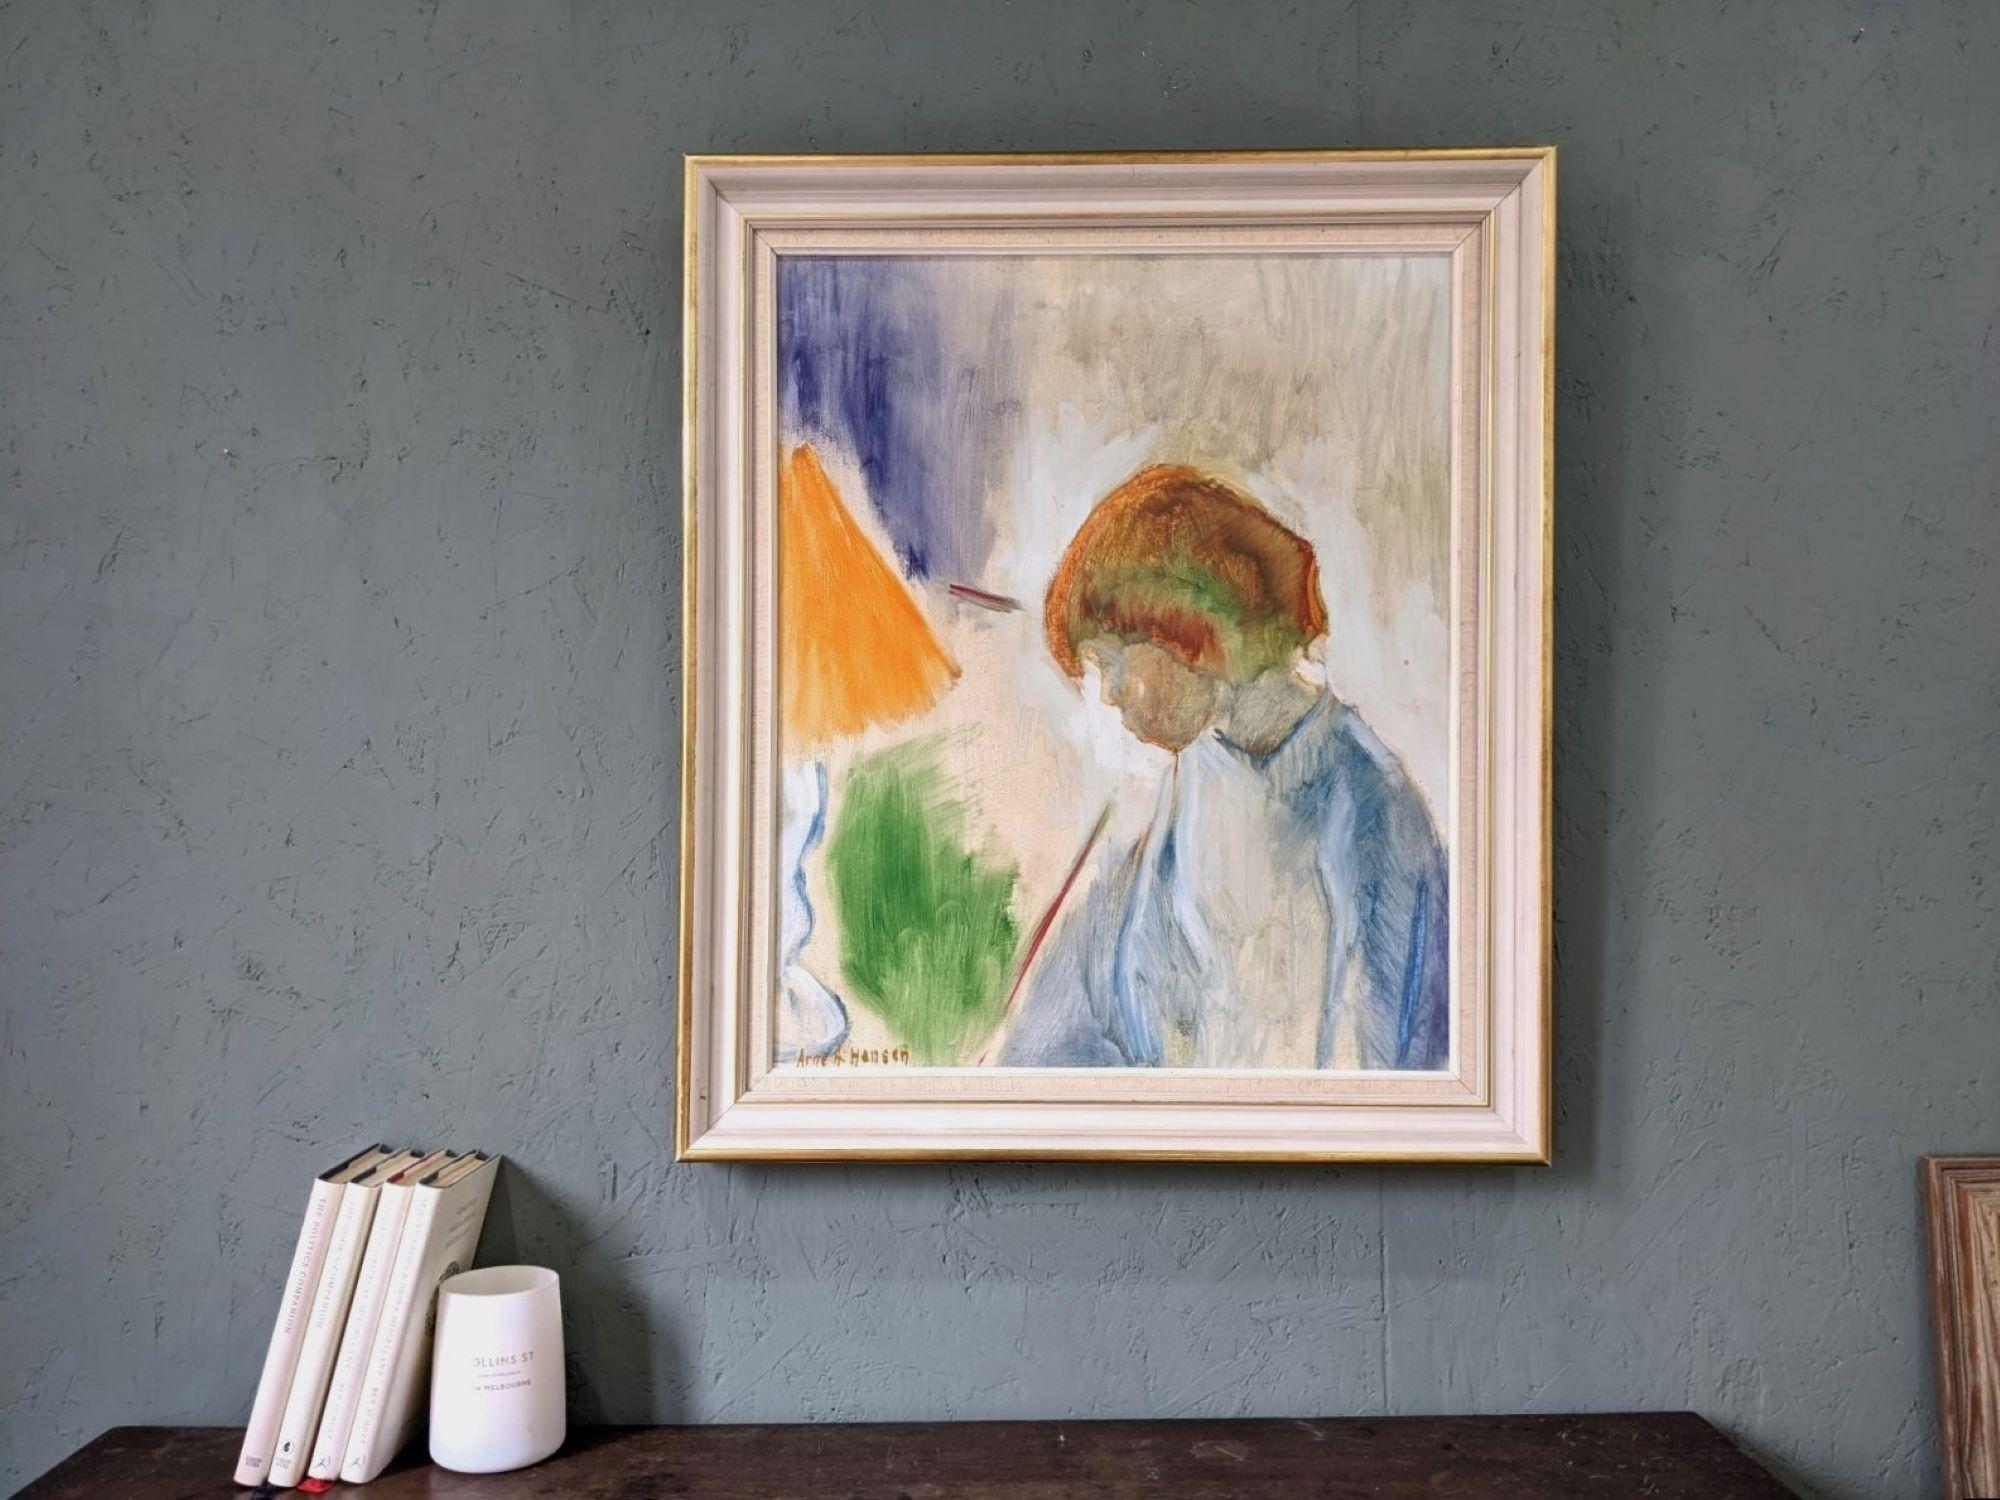 GLEAM
Size: 71 x 61 cm (including frame)
Oil on canvas

A thoughtful and expressive modernist style portrait, executed in oil onto canvas.

The artwork depicts a side profile view of a young figure dressed in blue clothing, and standing beside a